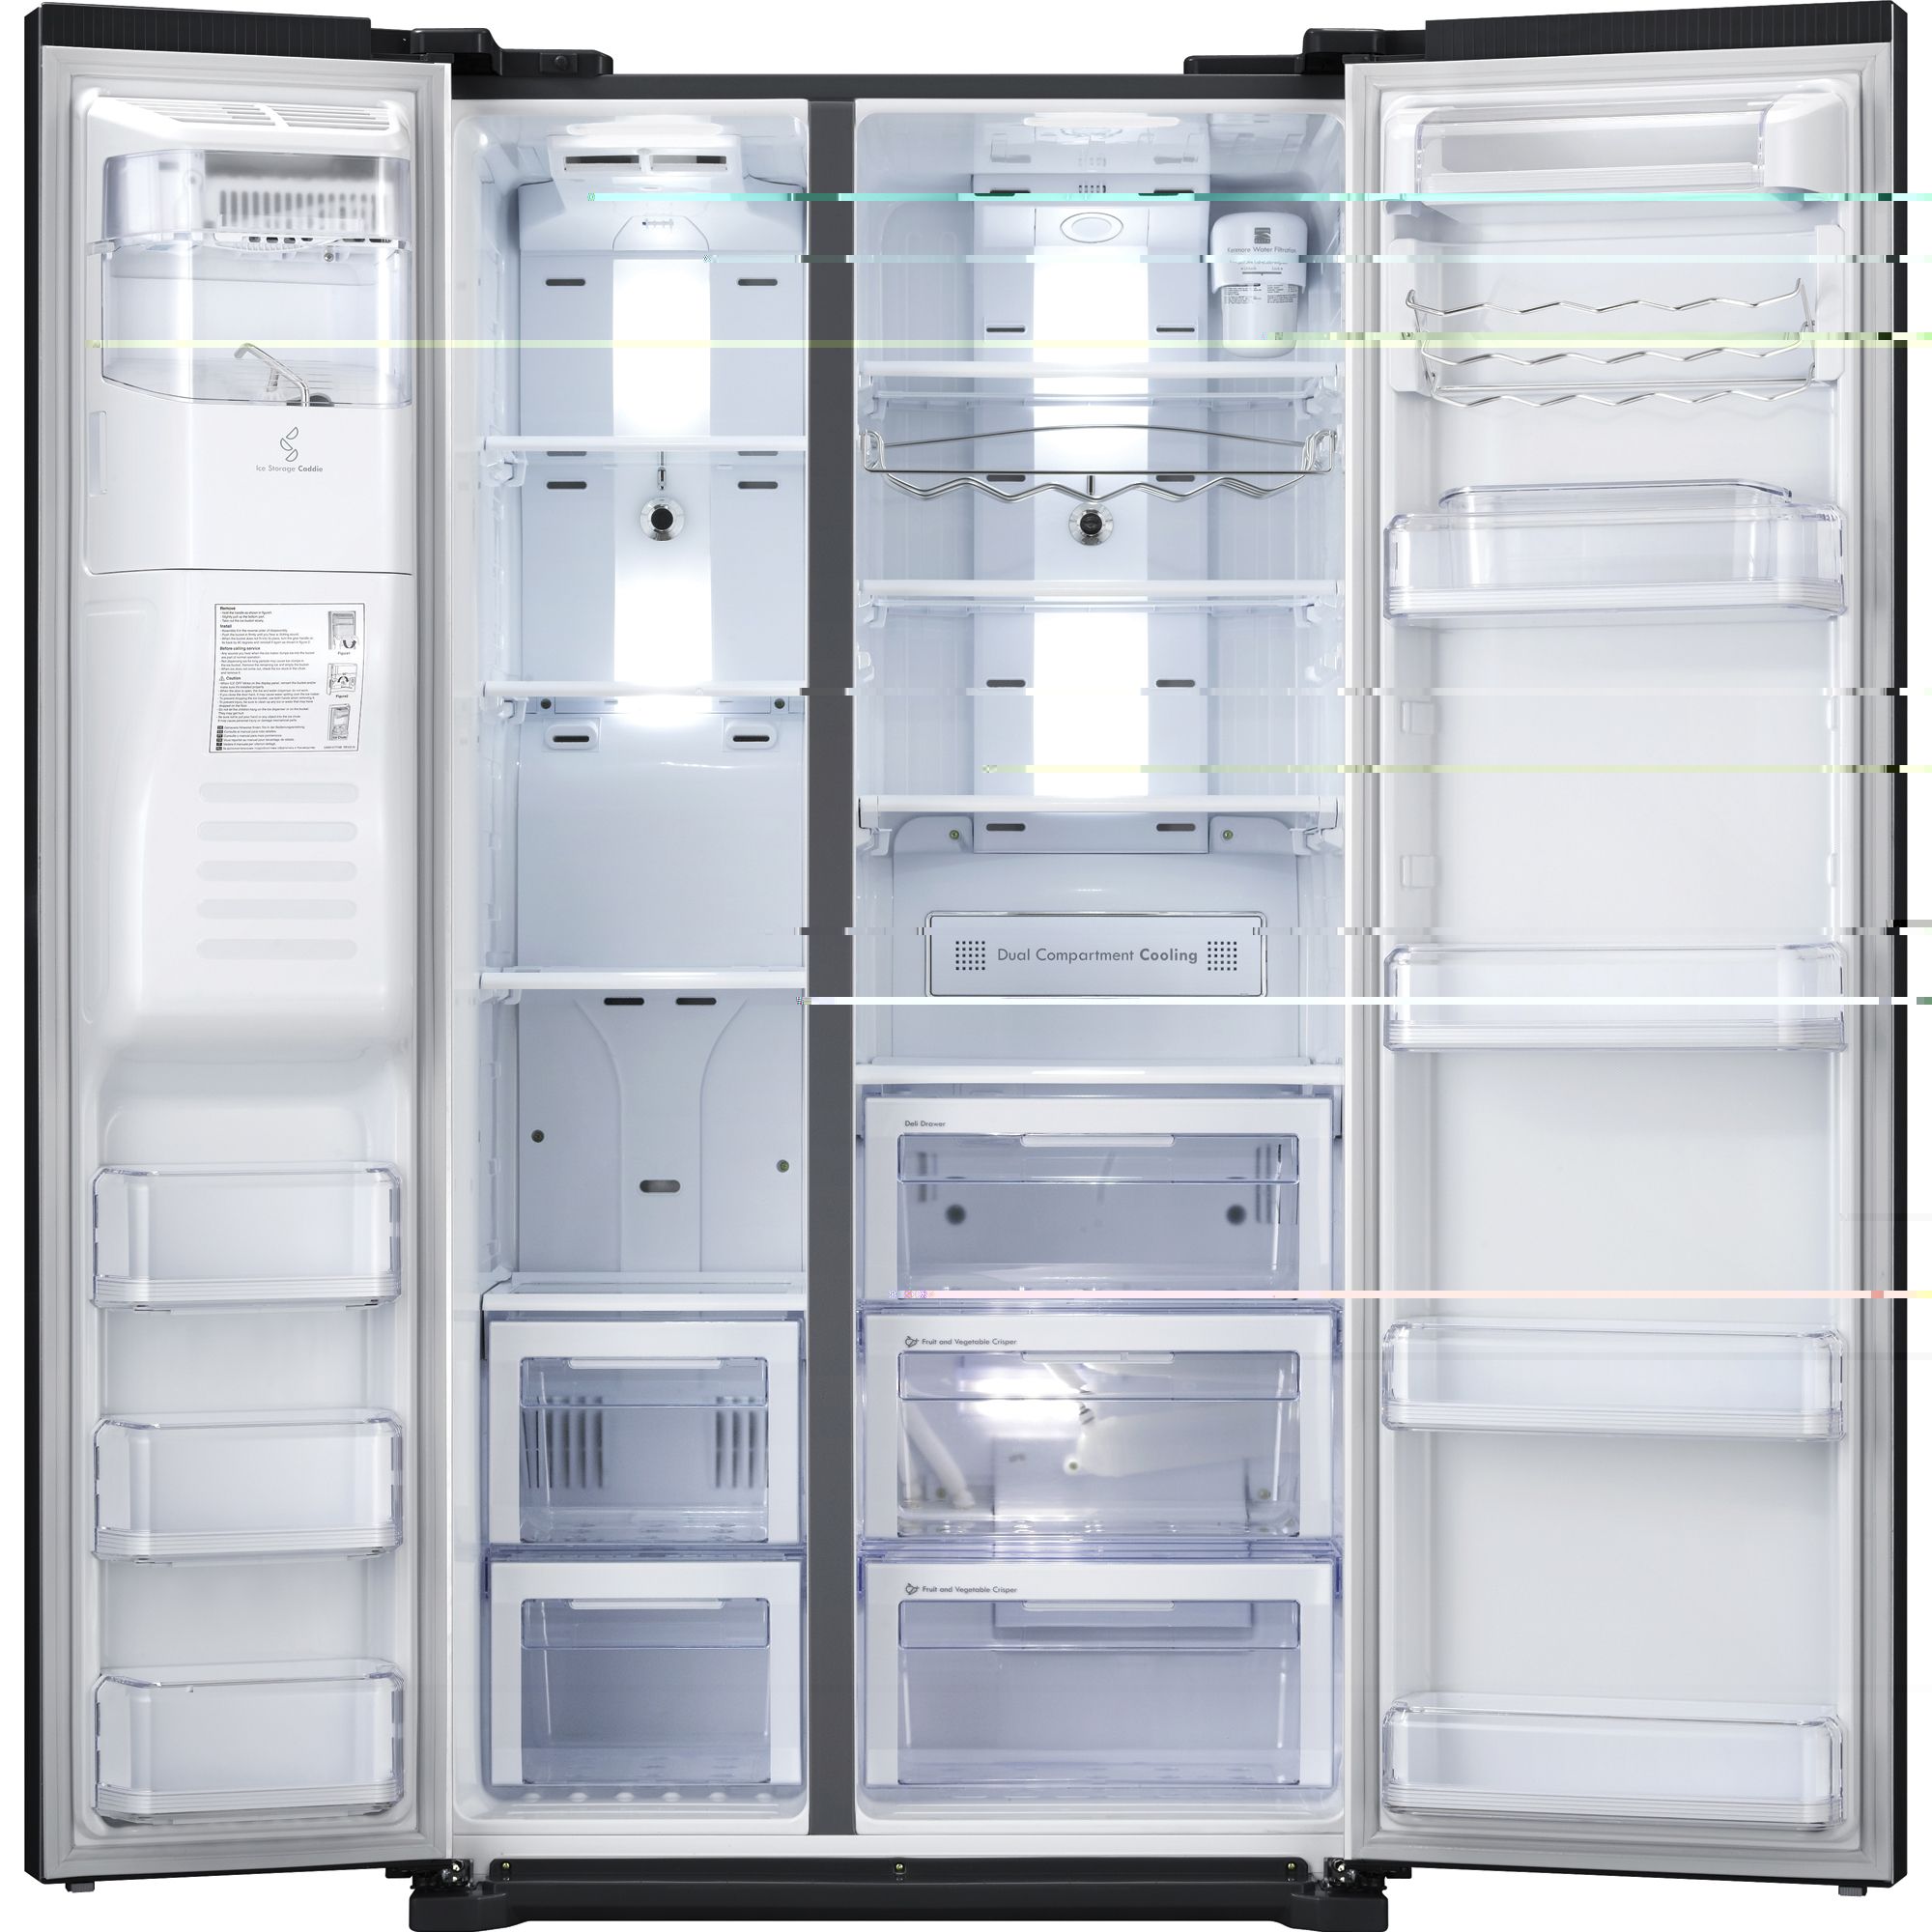 Kenmore Elite 41009 24 0 Cu Ft, How To Put Shelves Back In Kenmore Refrigerator